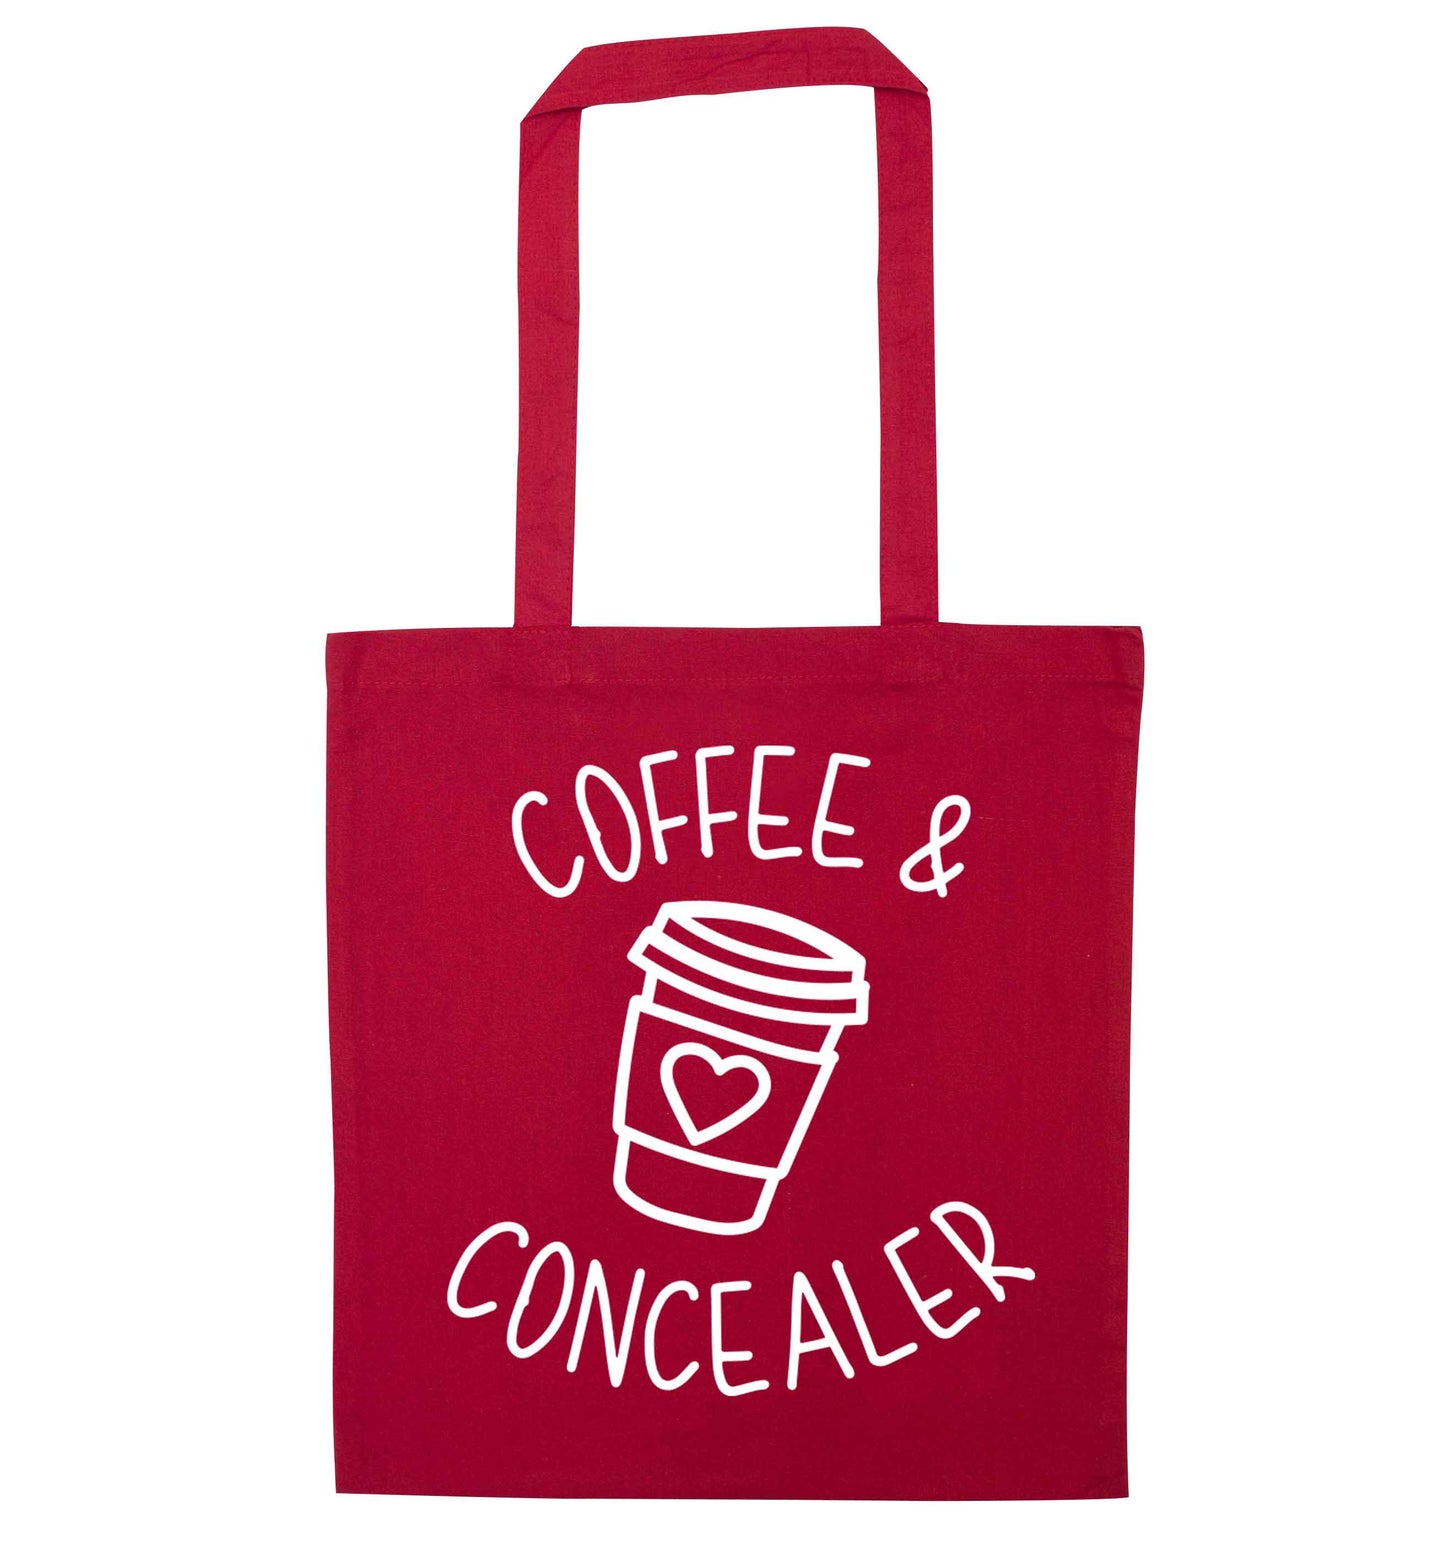 Coffee and concealer red tote bag